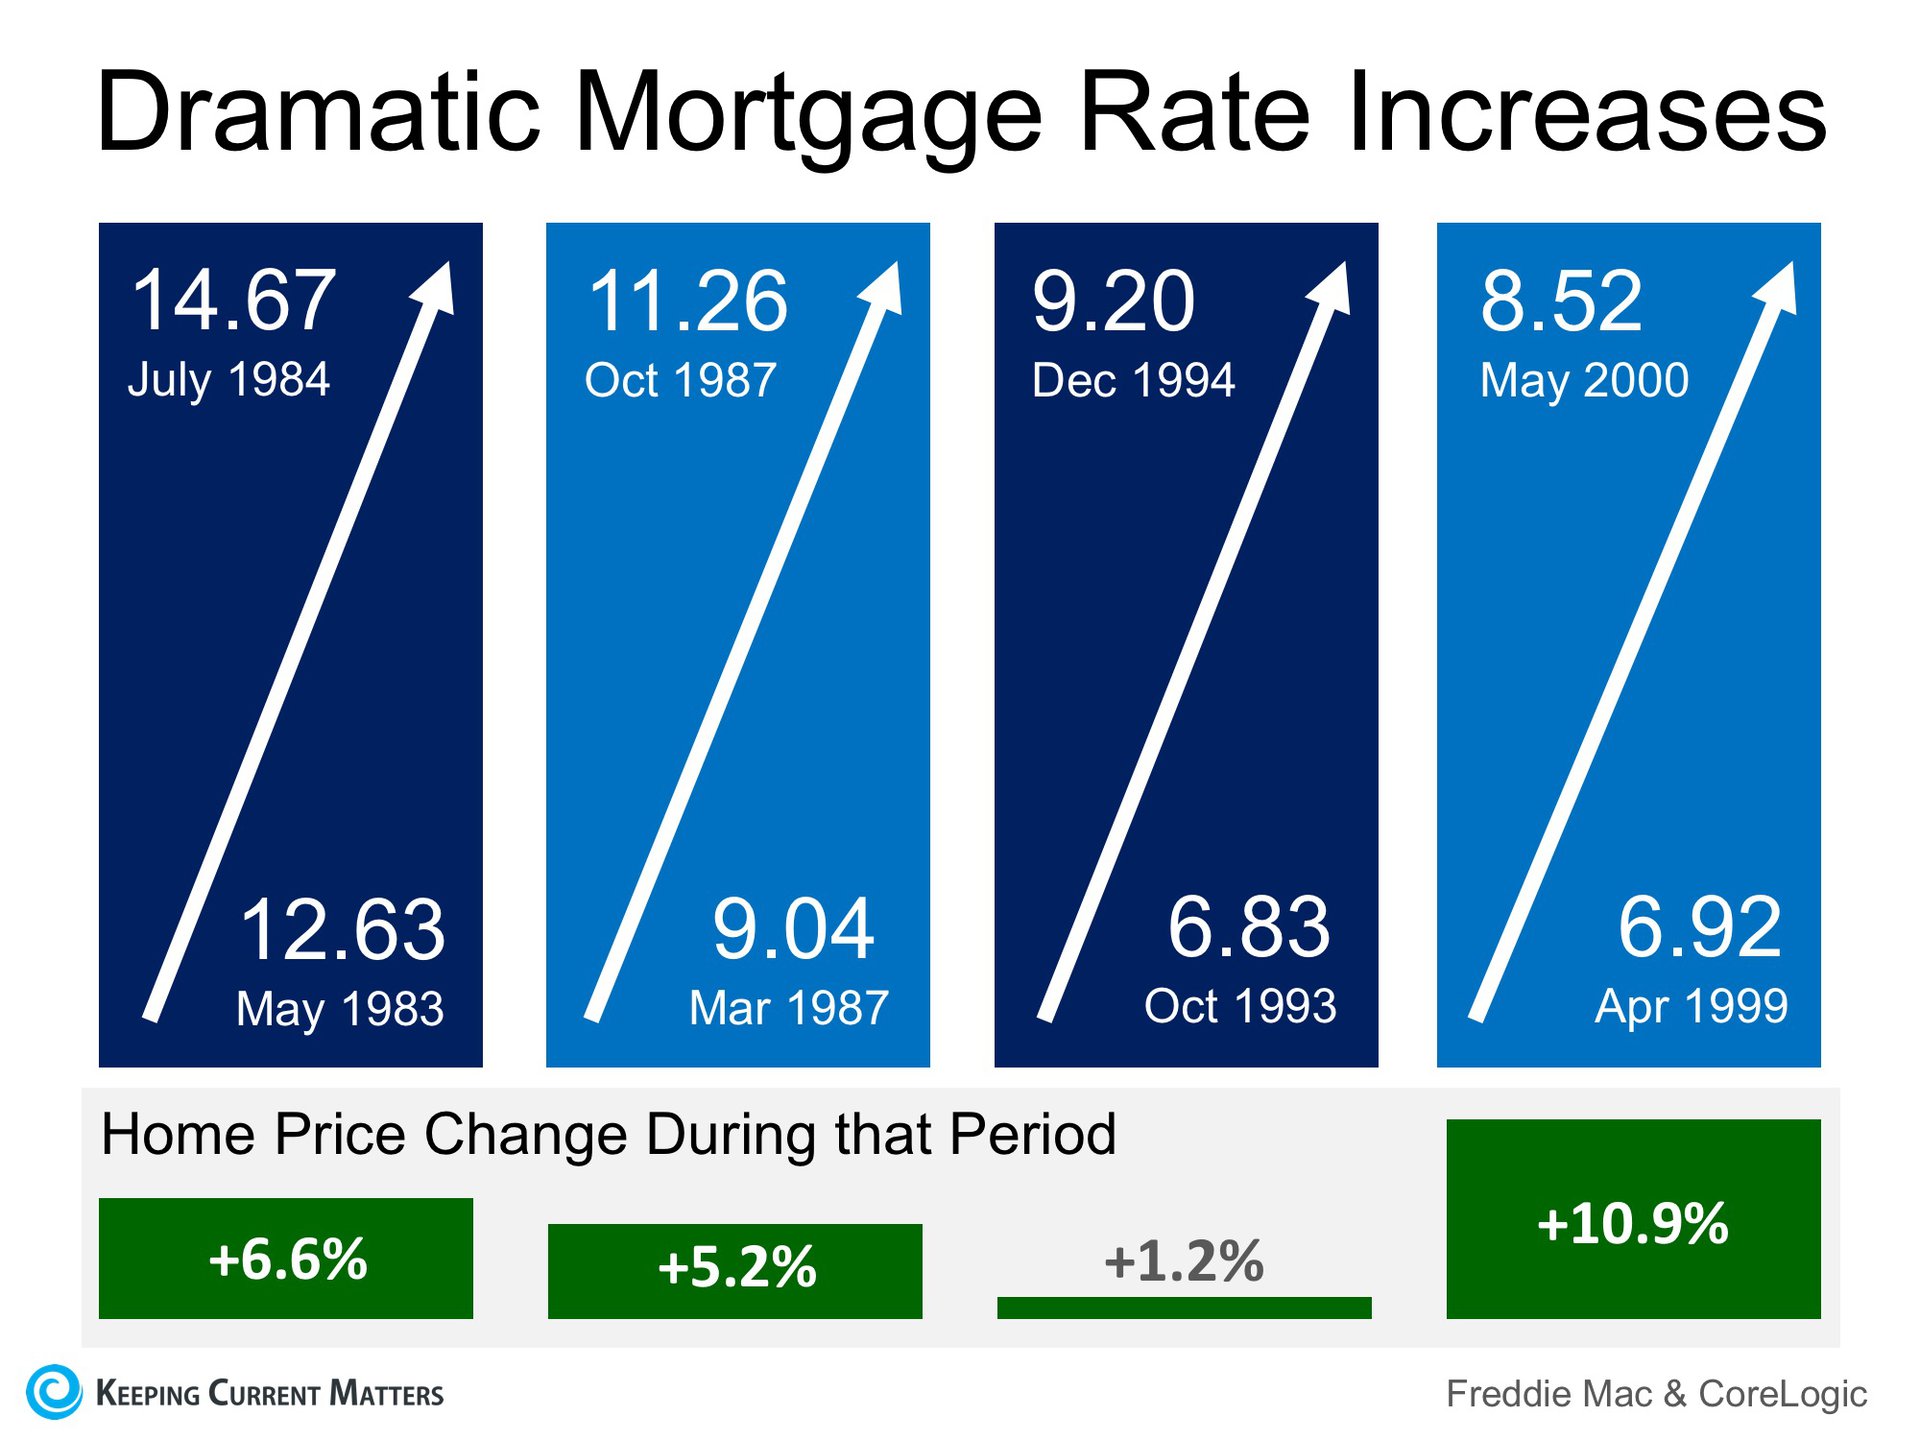 Mortgage Rates on FIRE! Home Prices Up in Smoke? | Keeping Current Matters